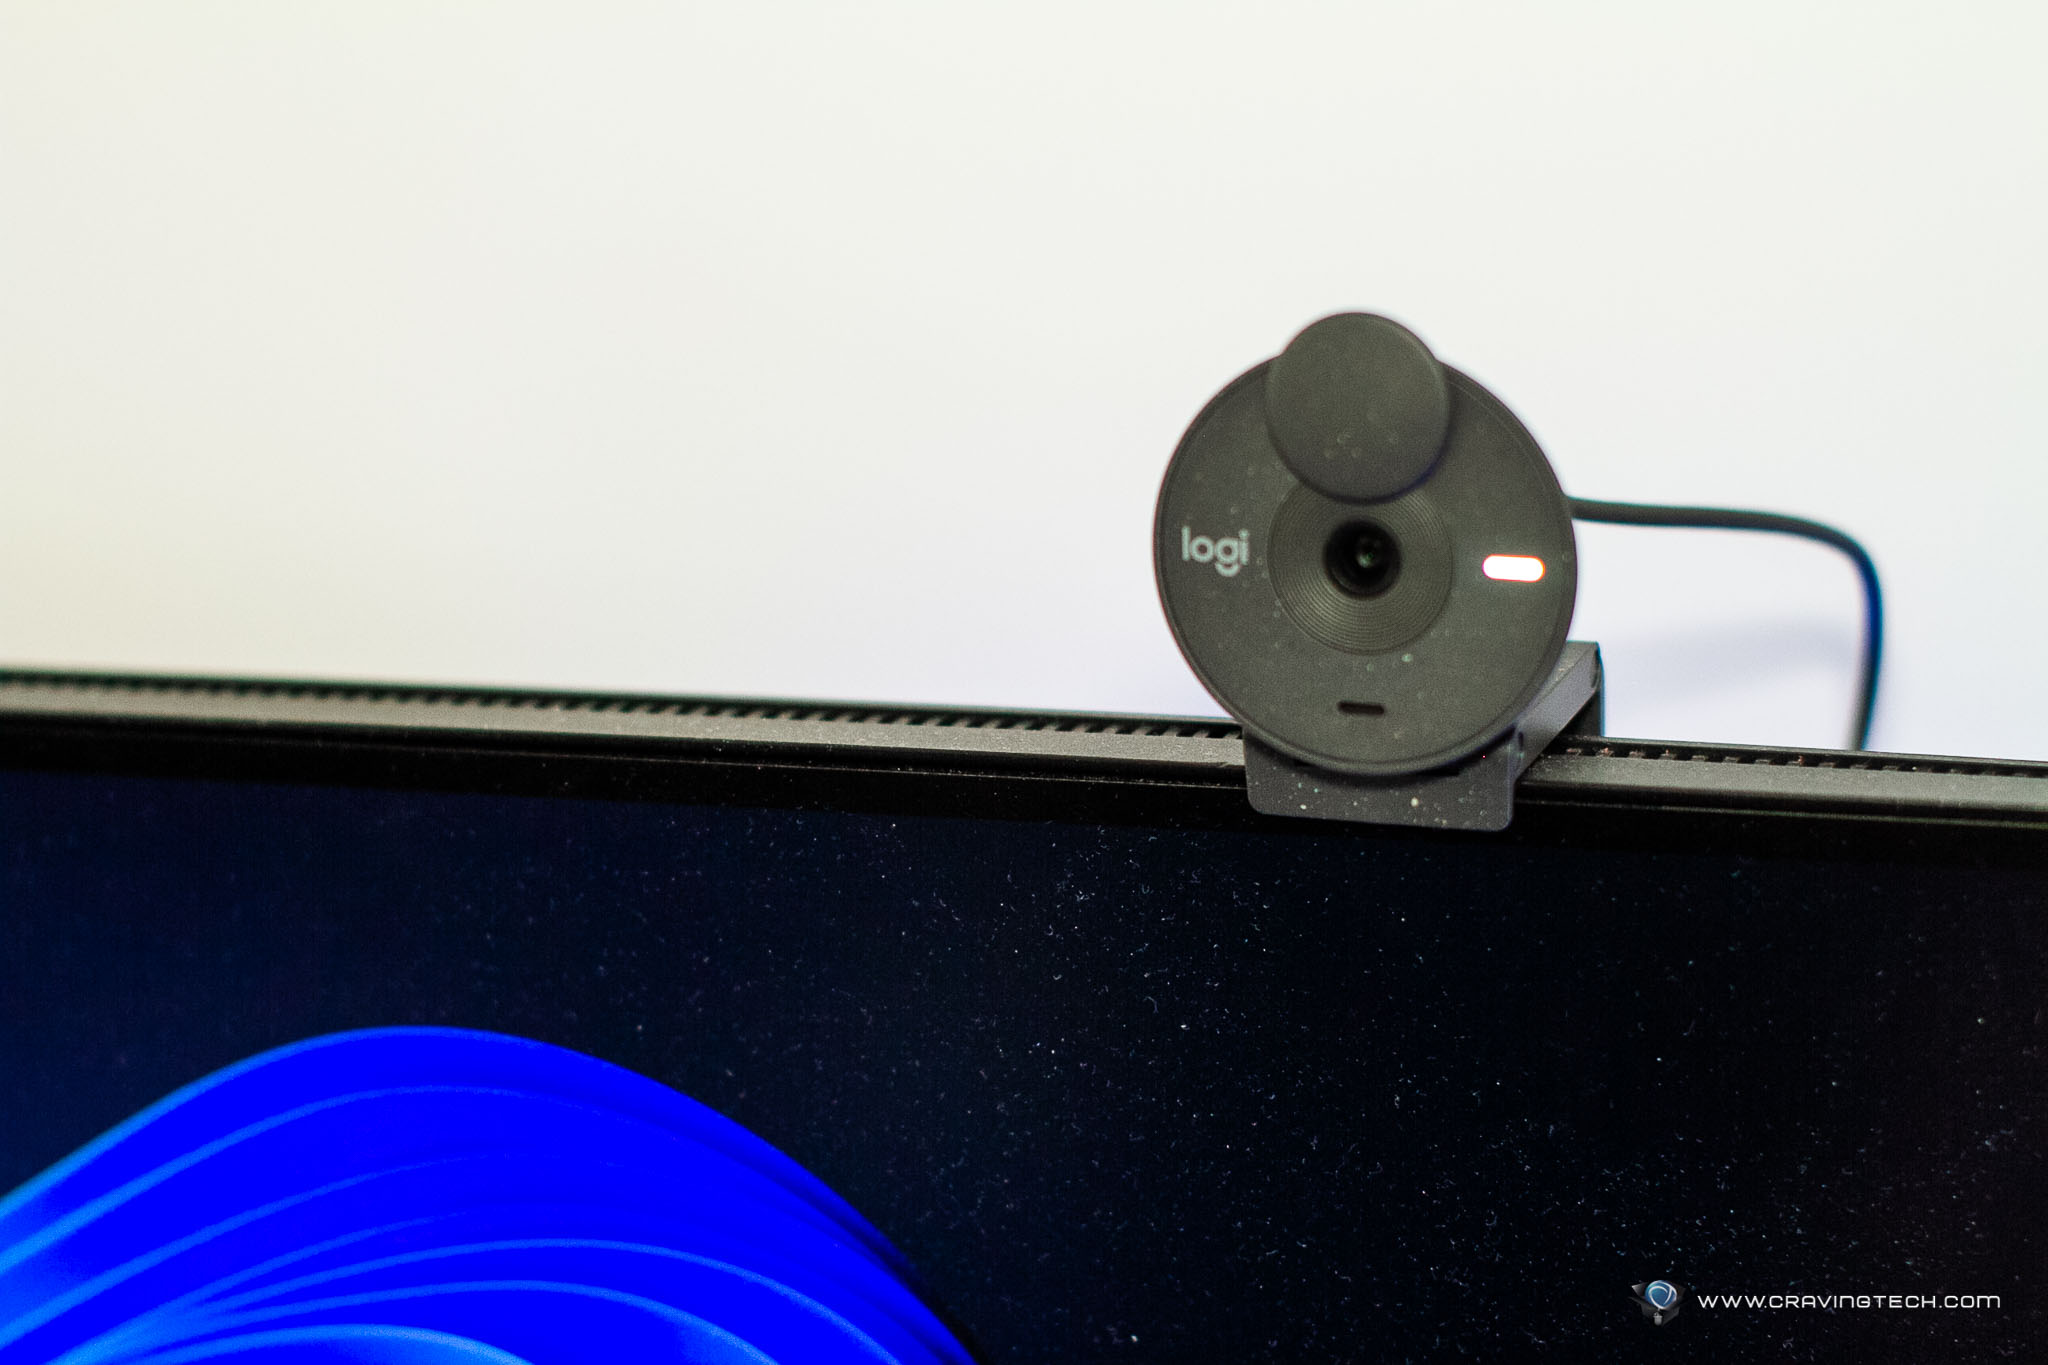 Logitech Brio 300 Review: A budget-friendly Webcam for video conferencing with decent quality